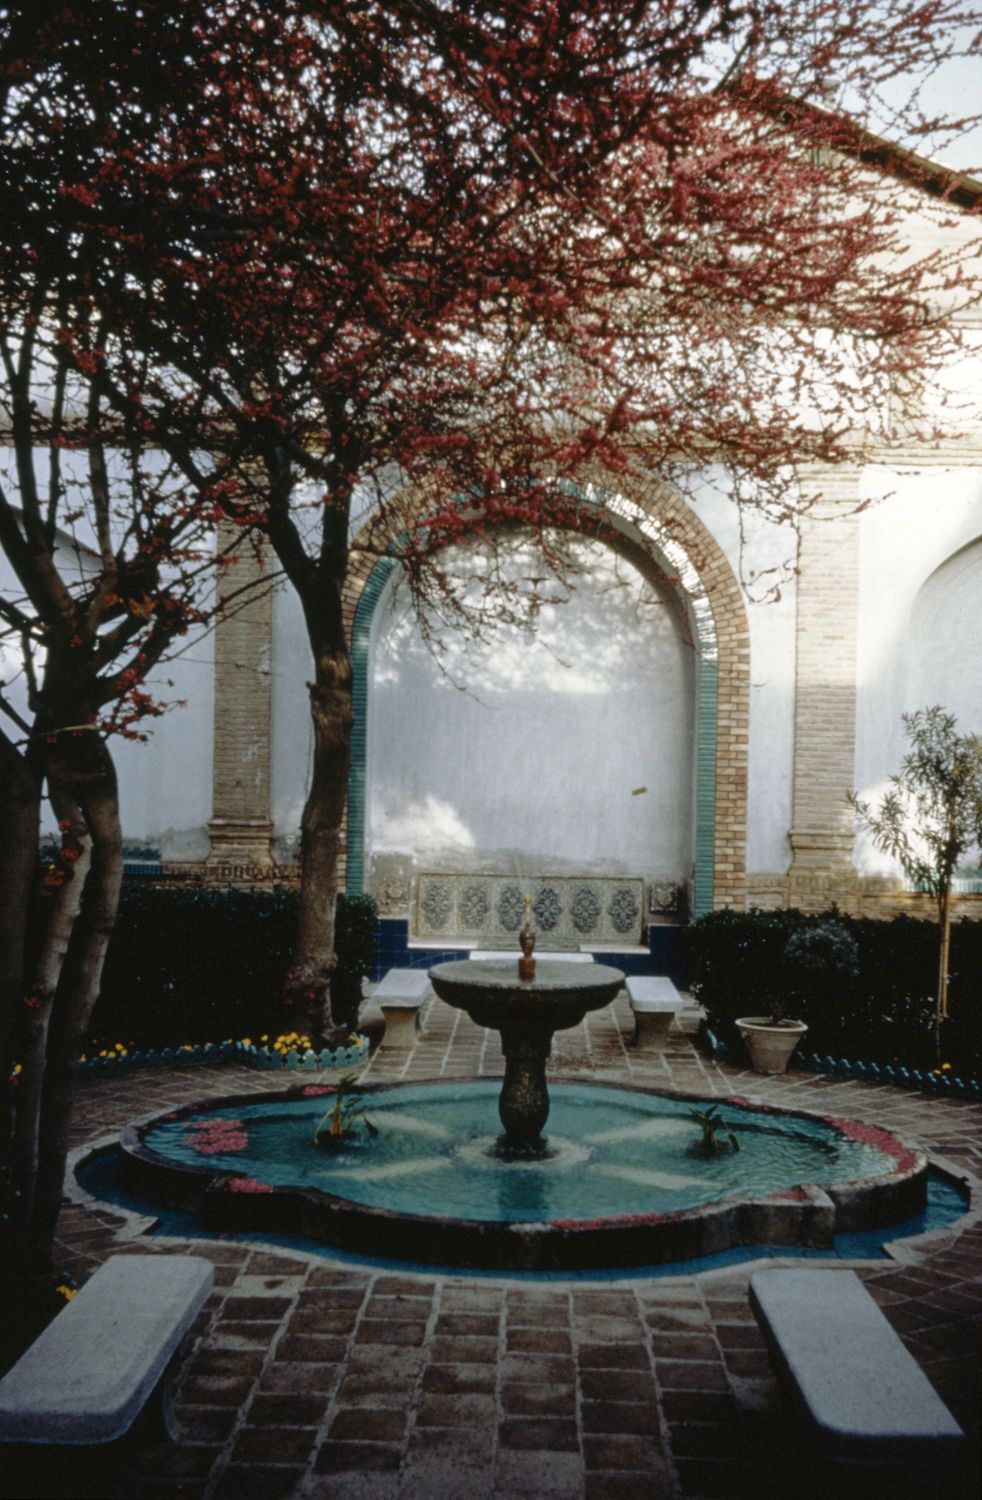 View of fountain.